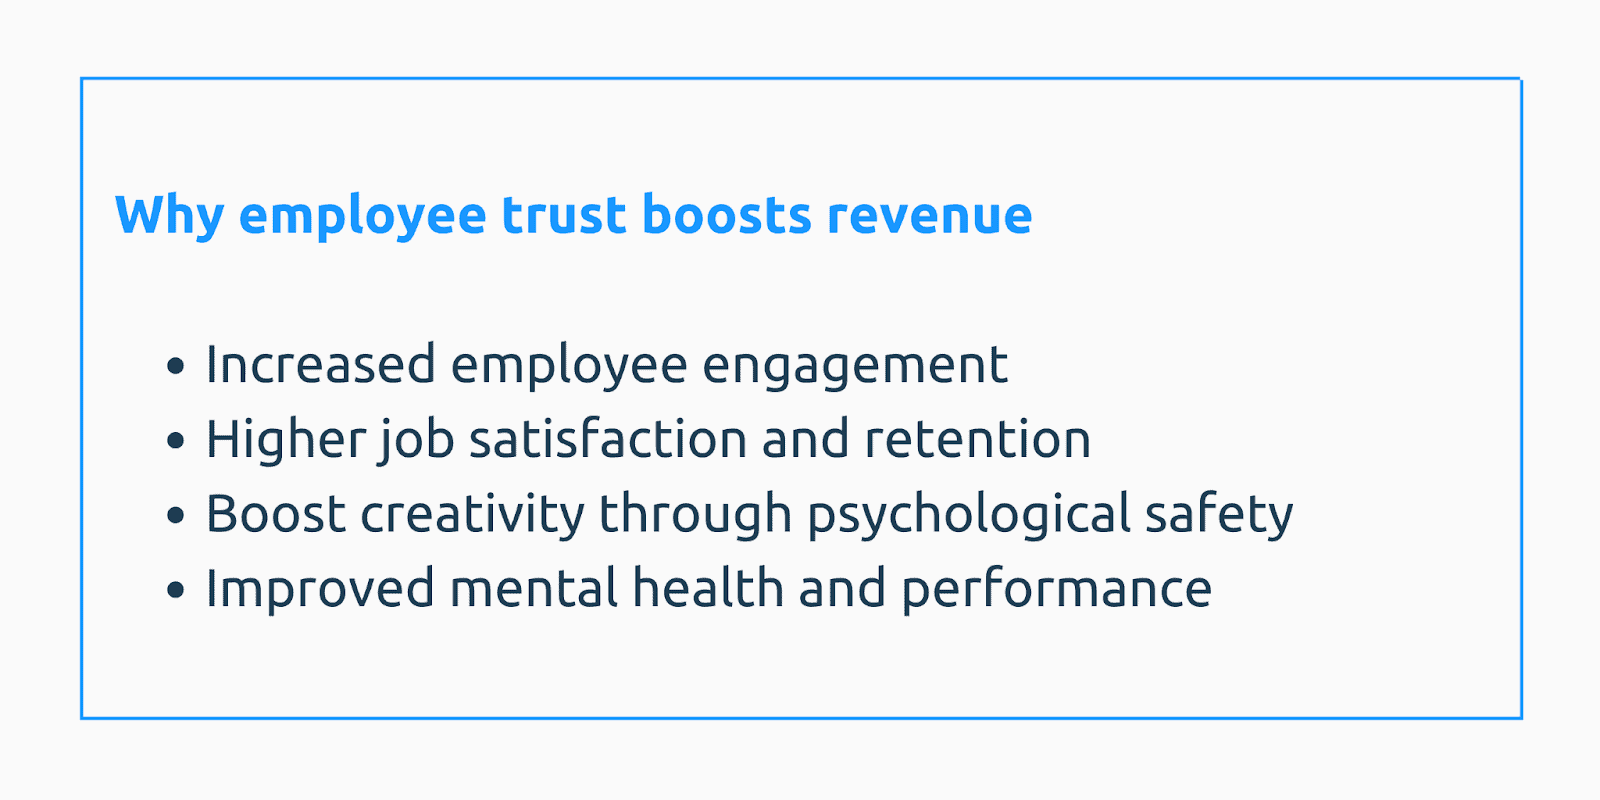 Why employee trust boosts revenue